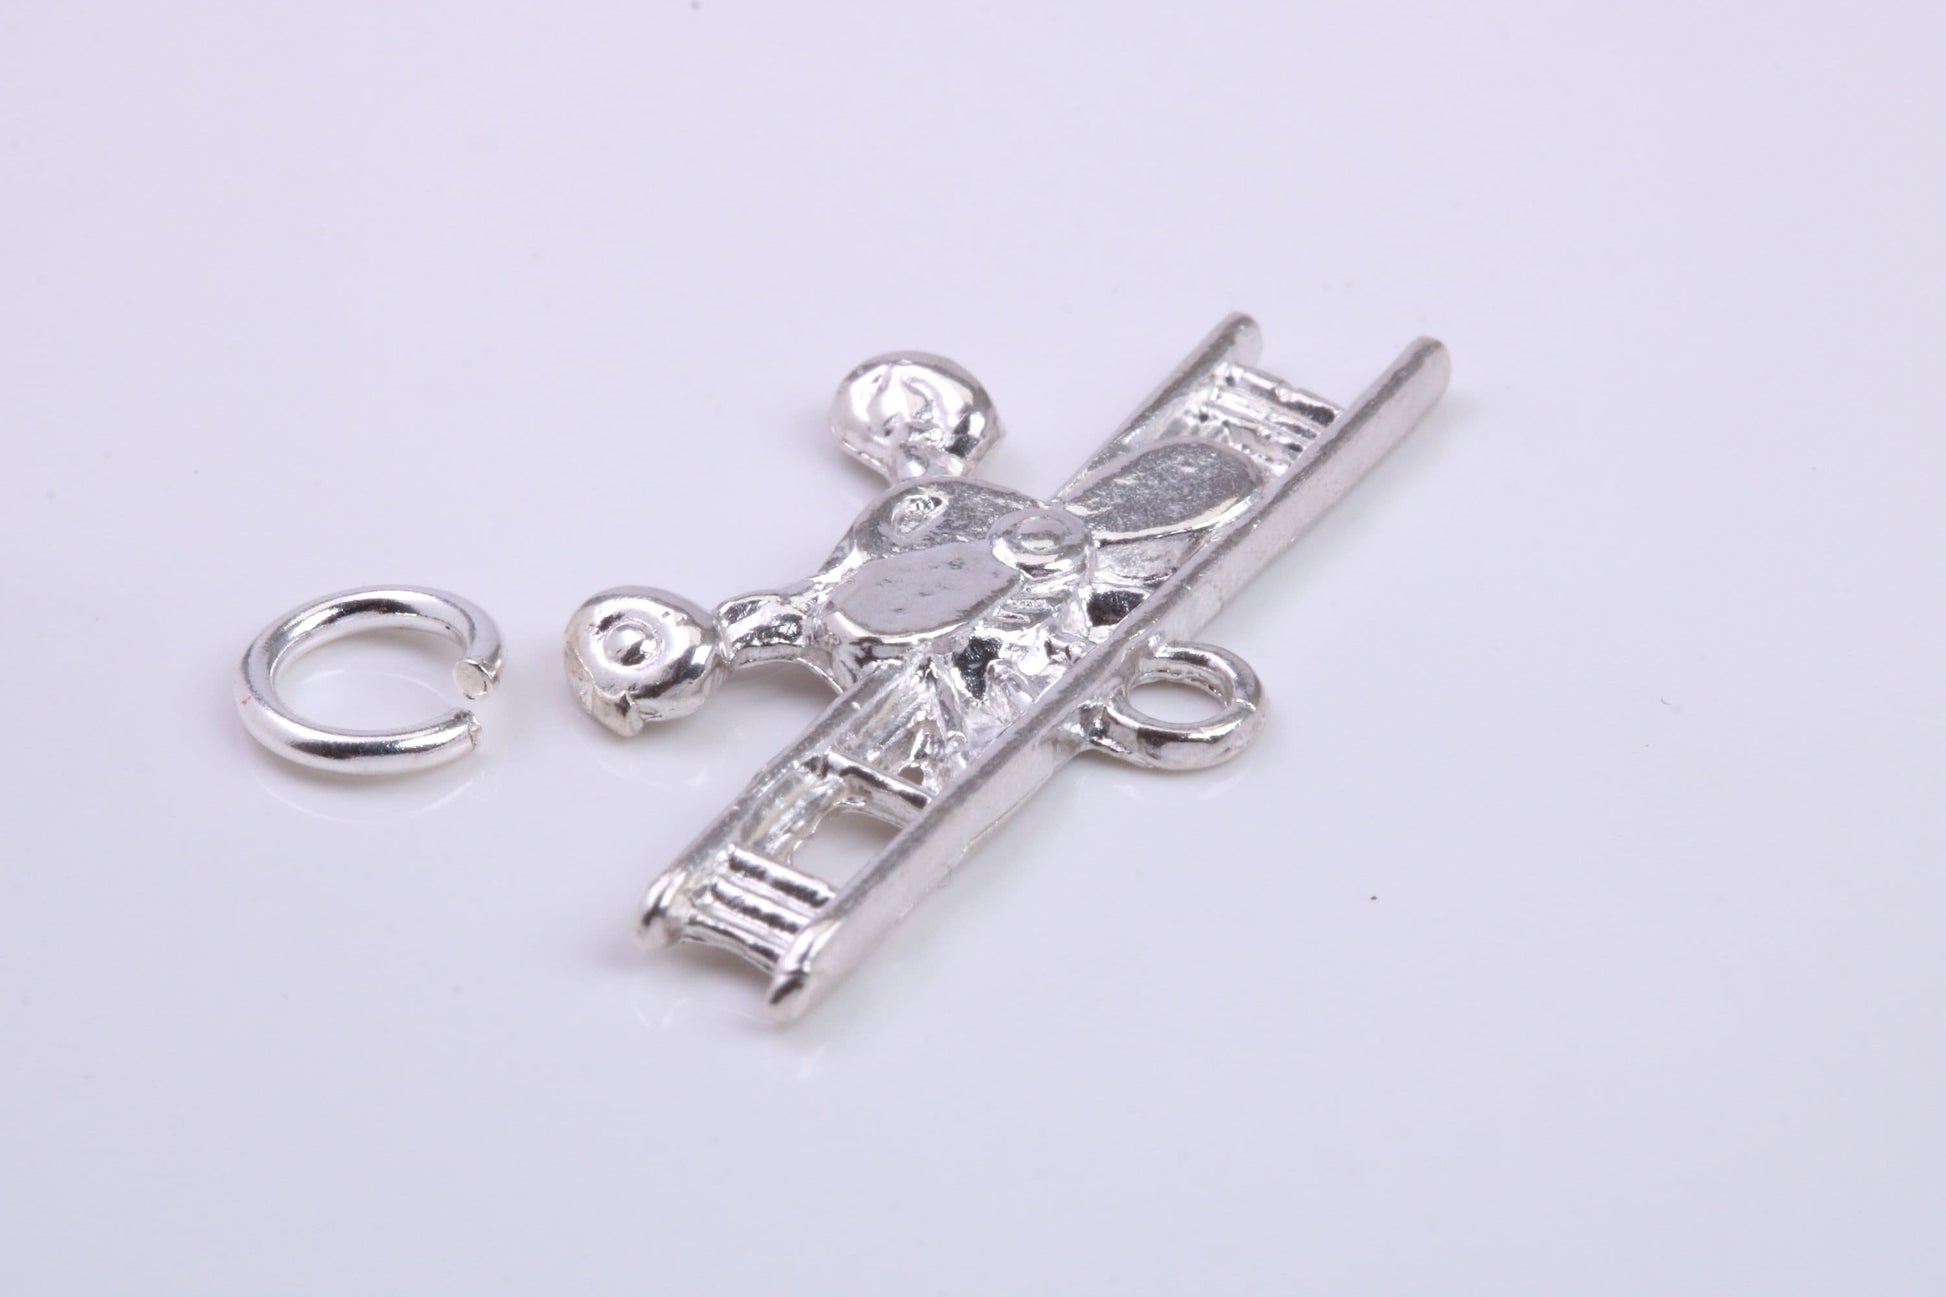 Airplane Charm, Traditional Charm, Made from Solid 925 Grade Sterling Silver, Complete with Attachment Link